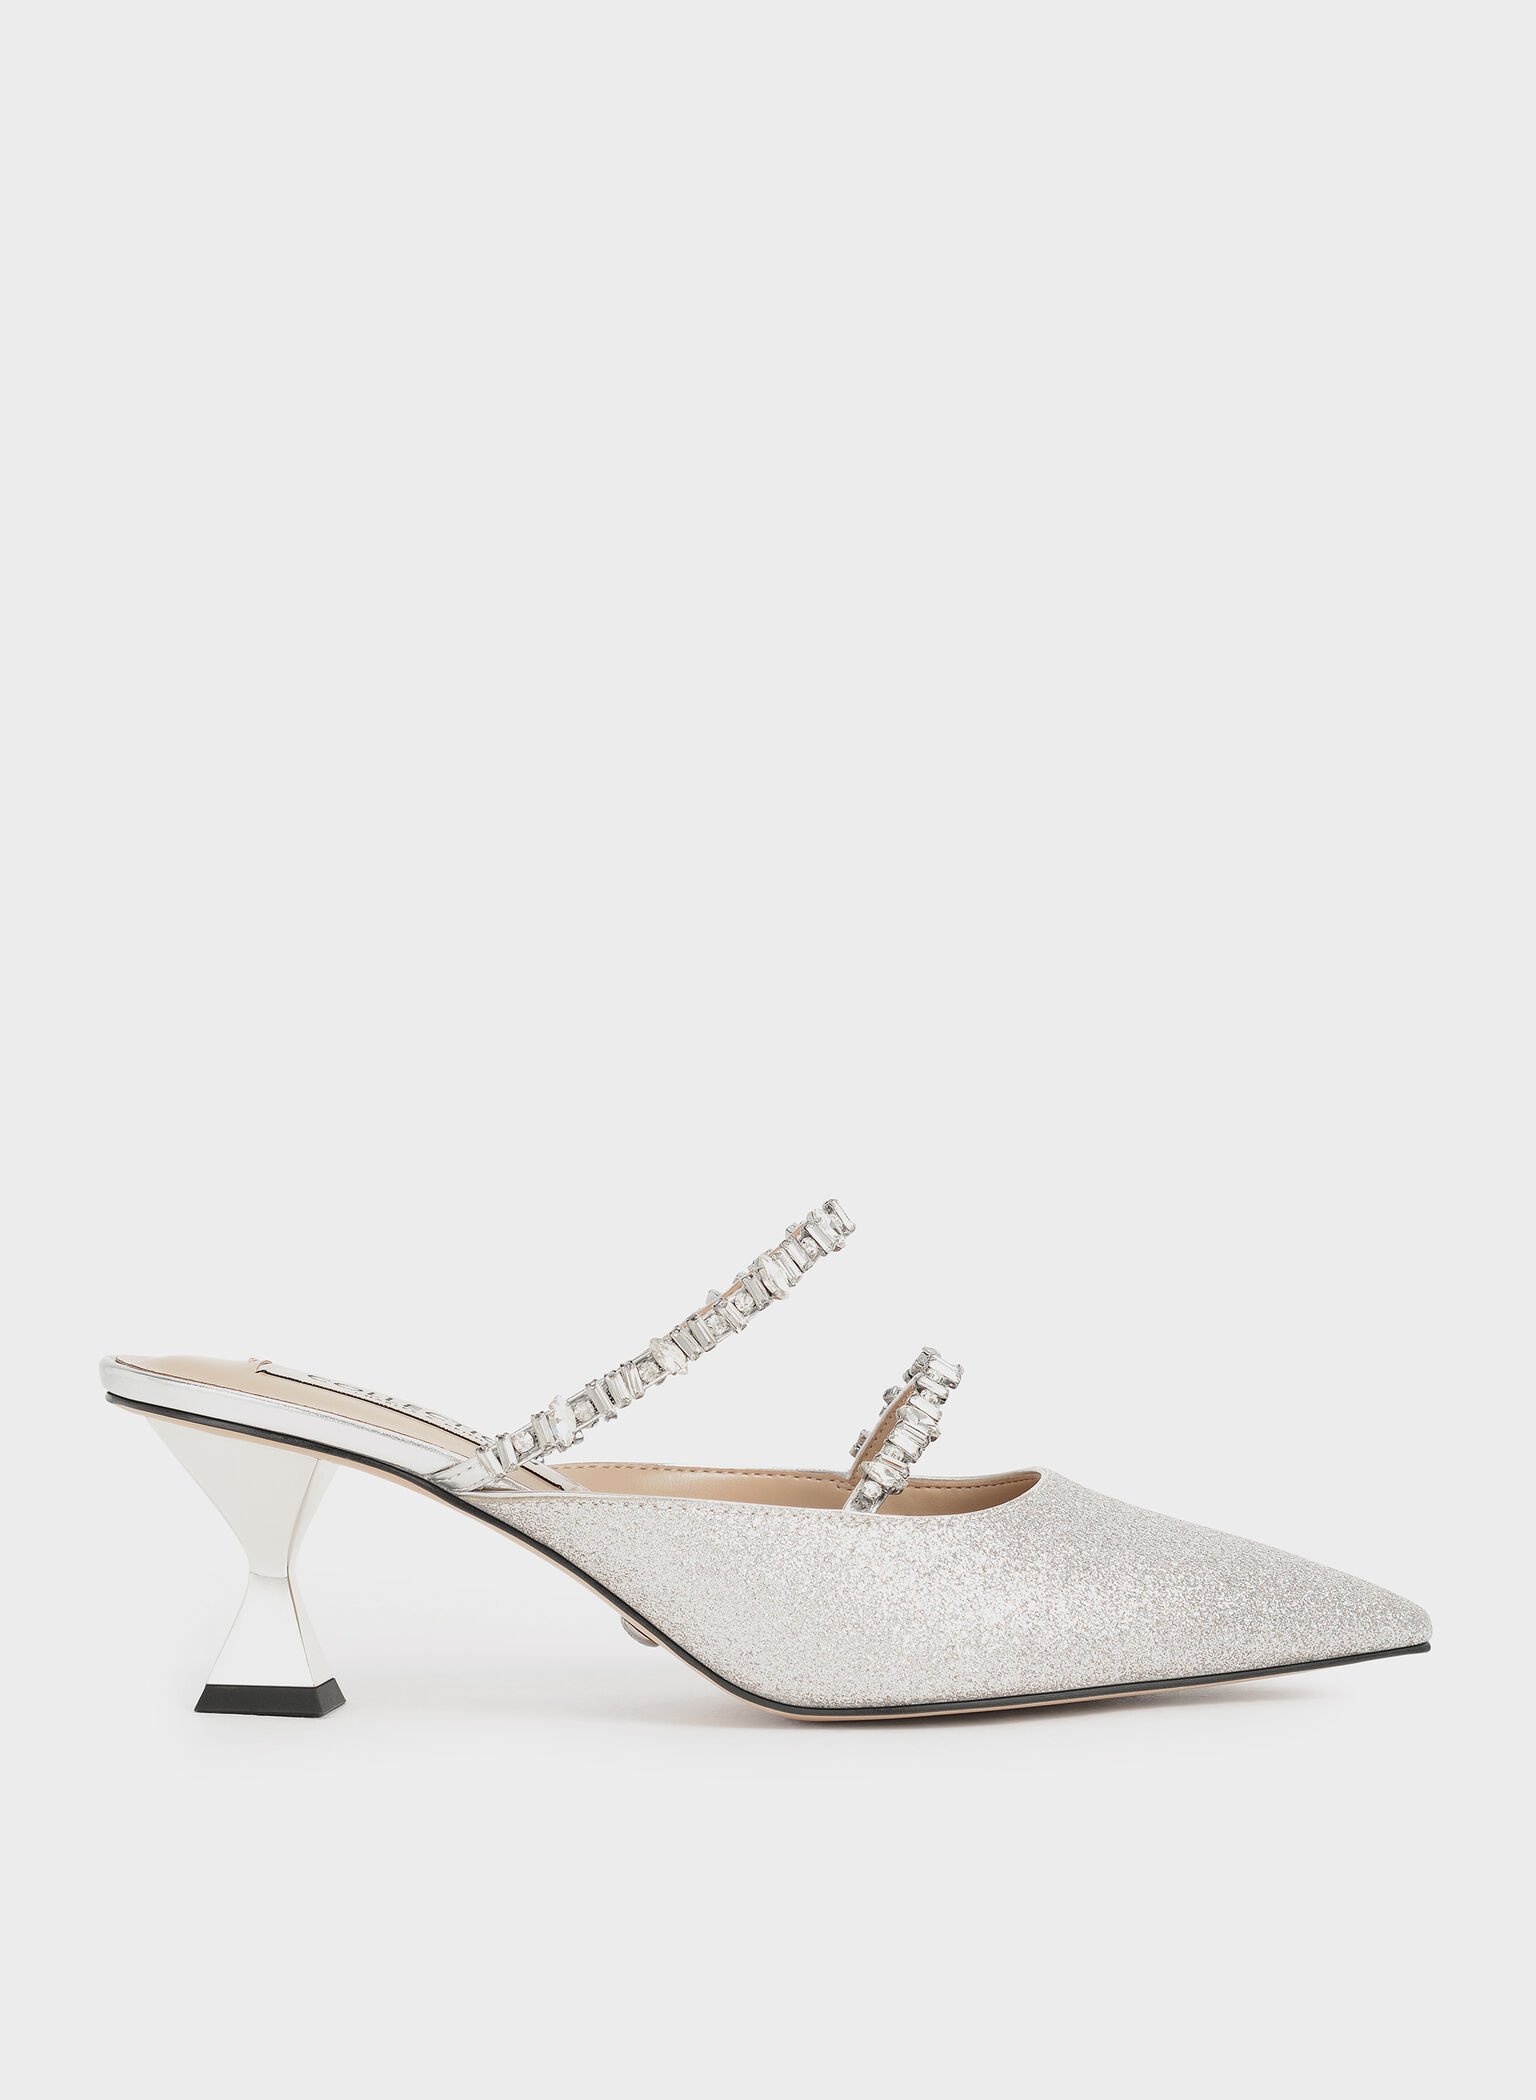 Silver Gem-Encrusted Metallic Glittered Mules - CHARLES & KEITH US